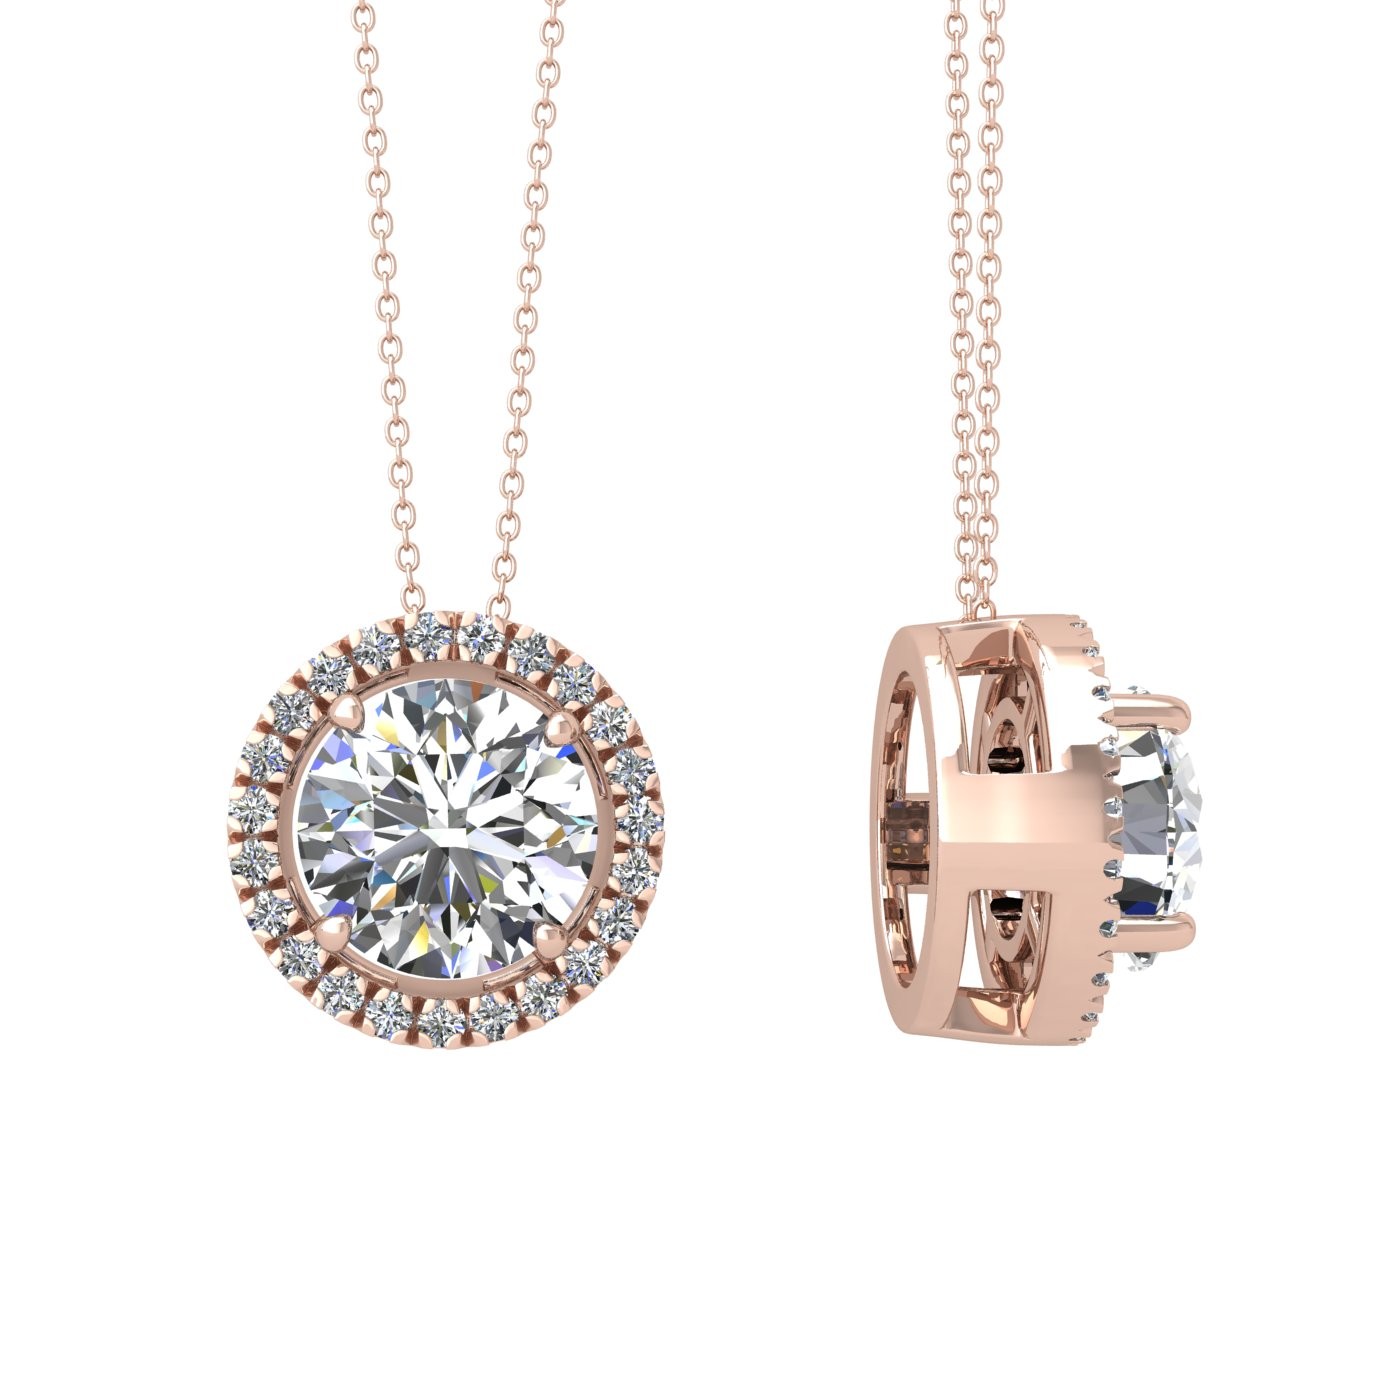 18k rose gold  1,2 ct 4 prong round shape diamond pendant with diamond pavÉ set halo including chain seperate from the pendant Photos & images